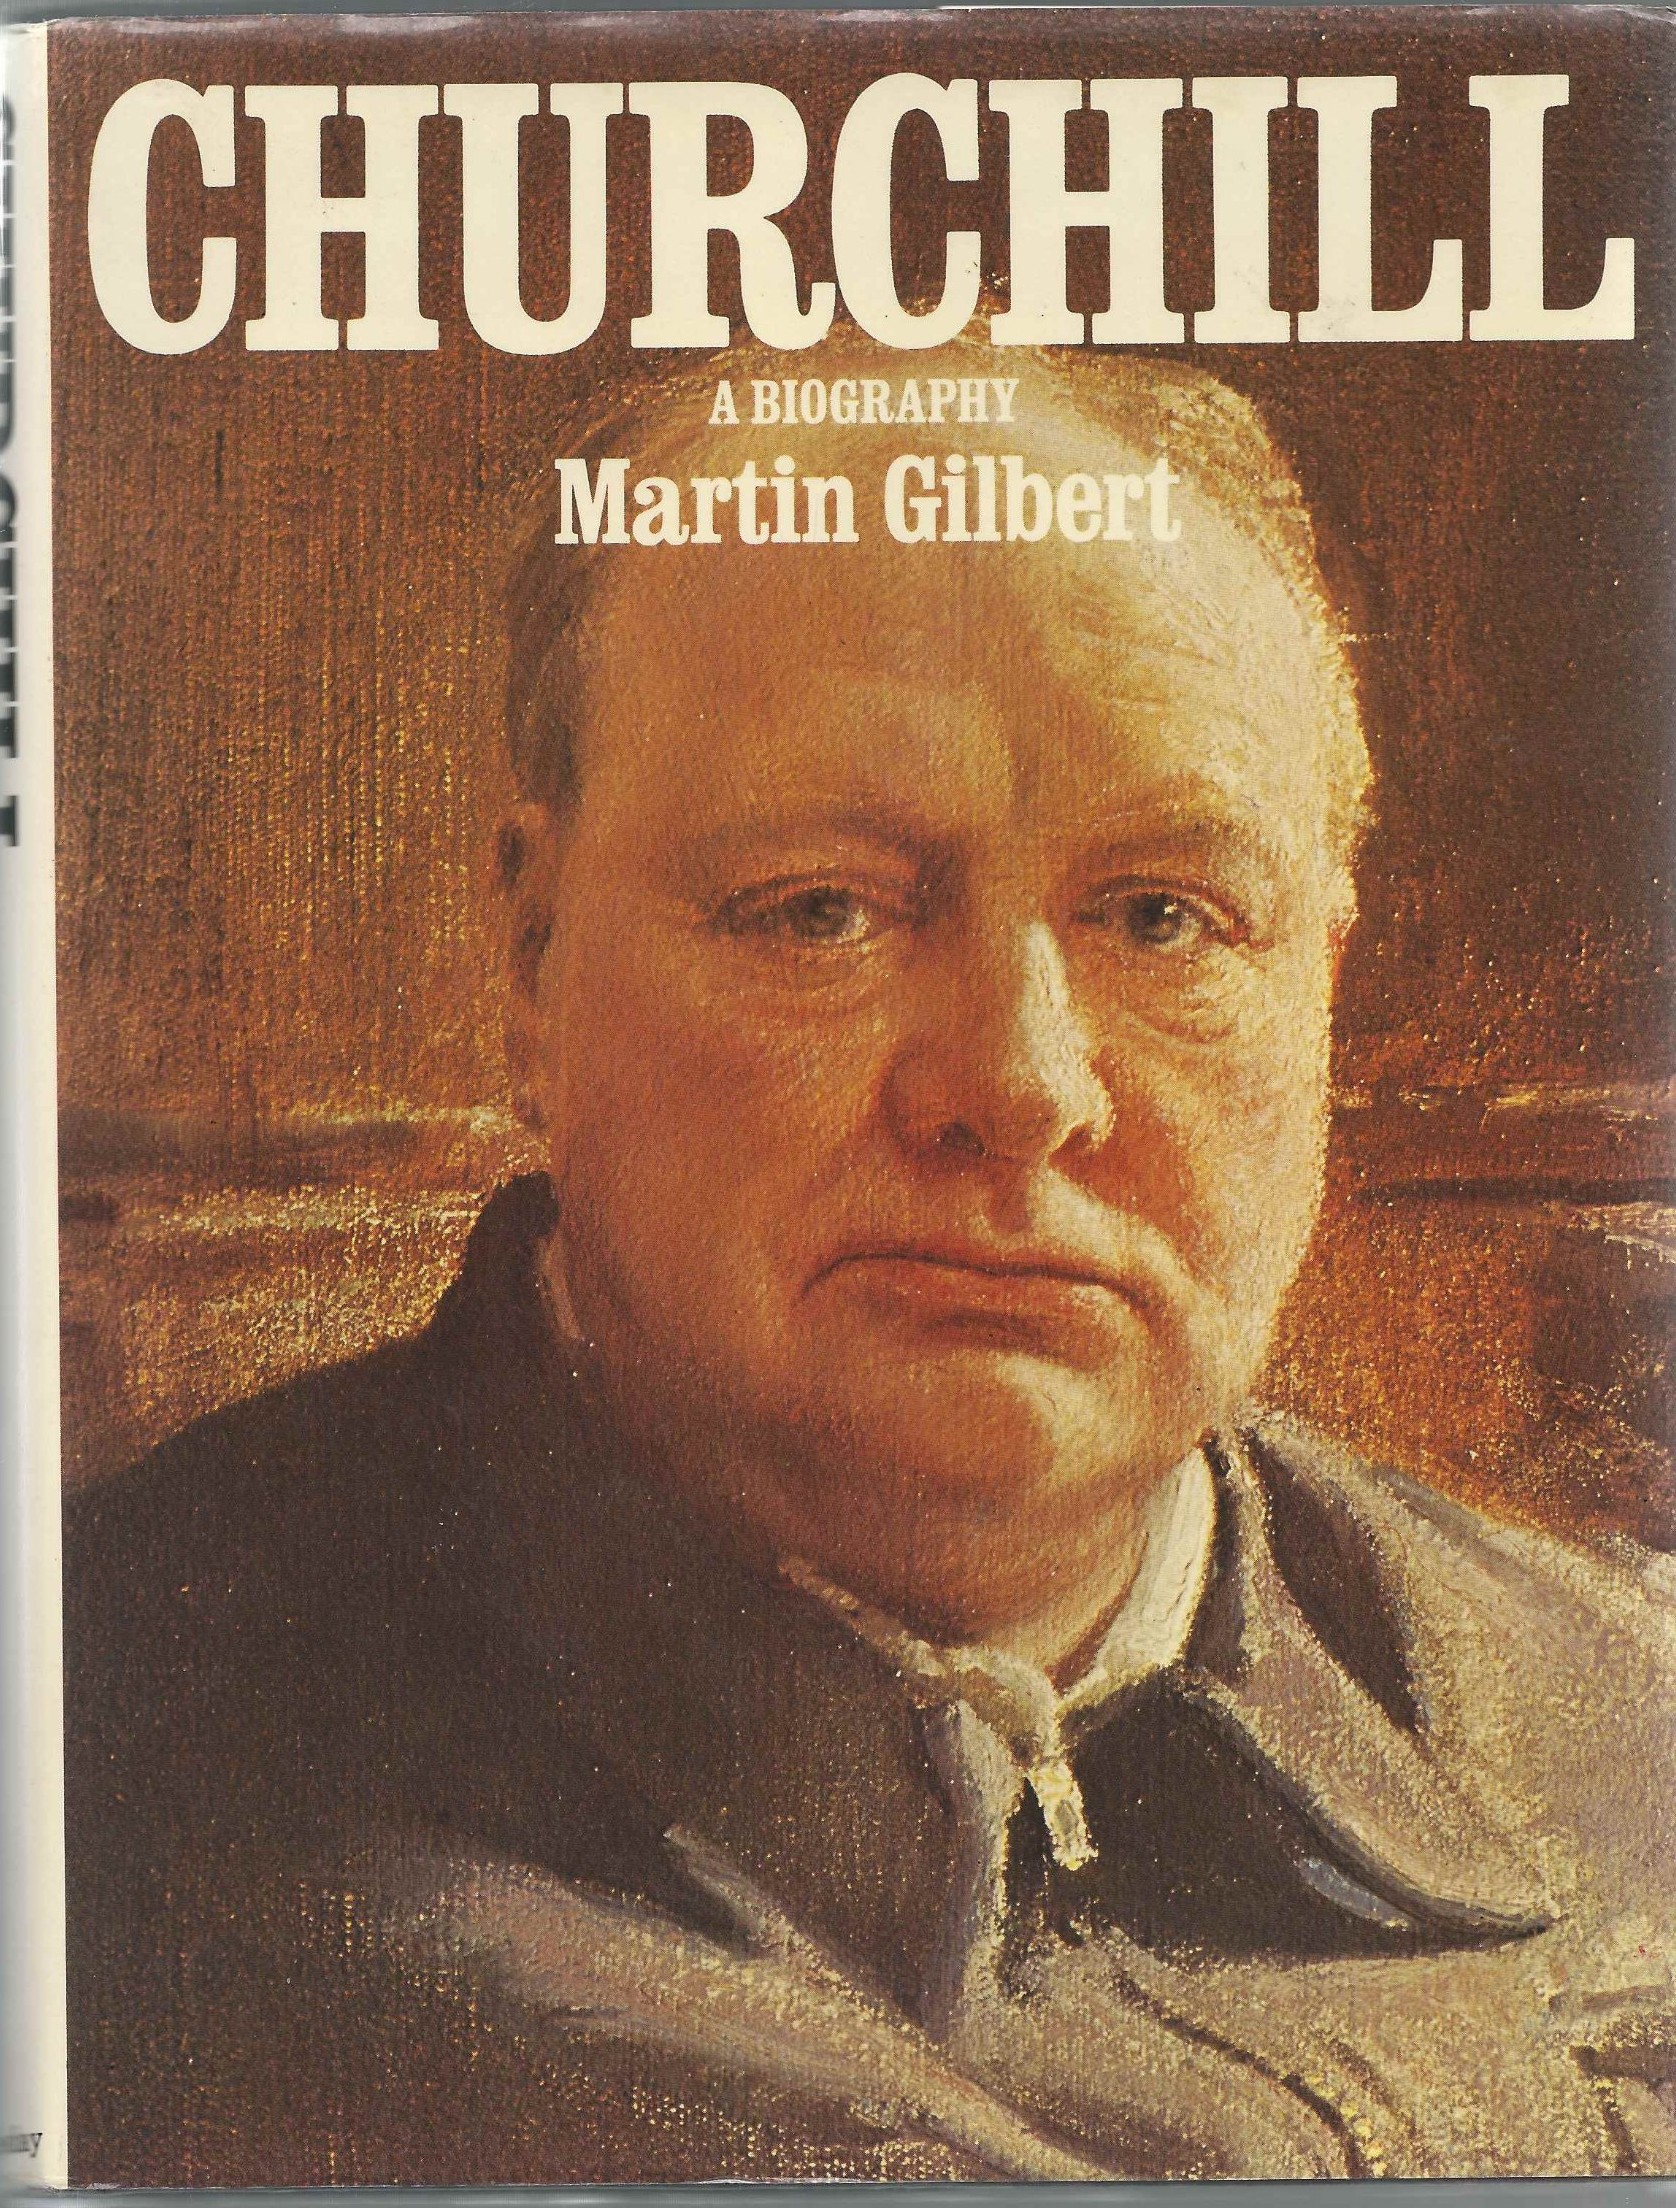 best biography about winston churchill